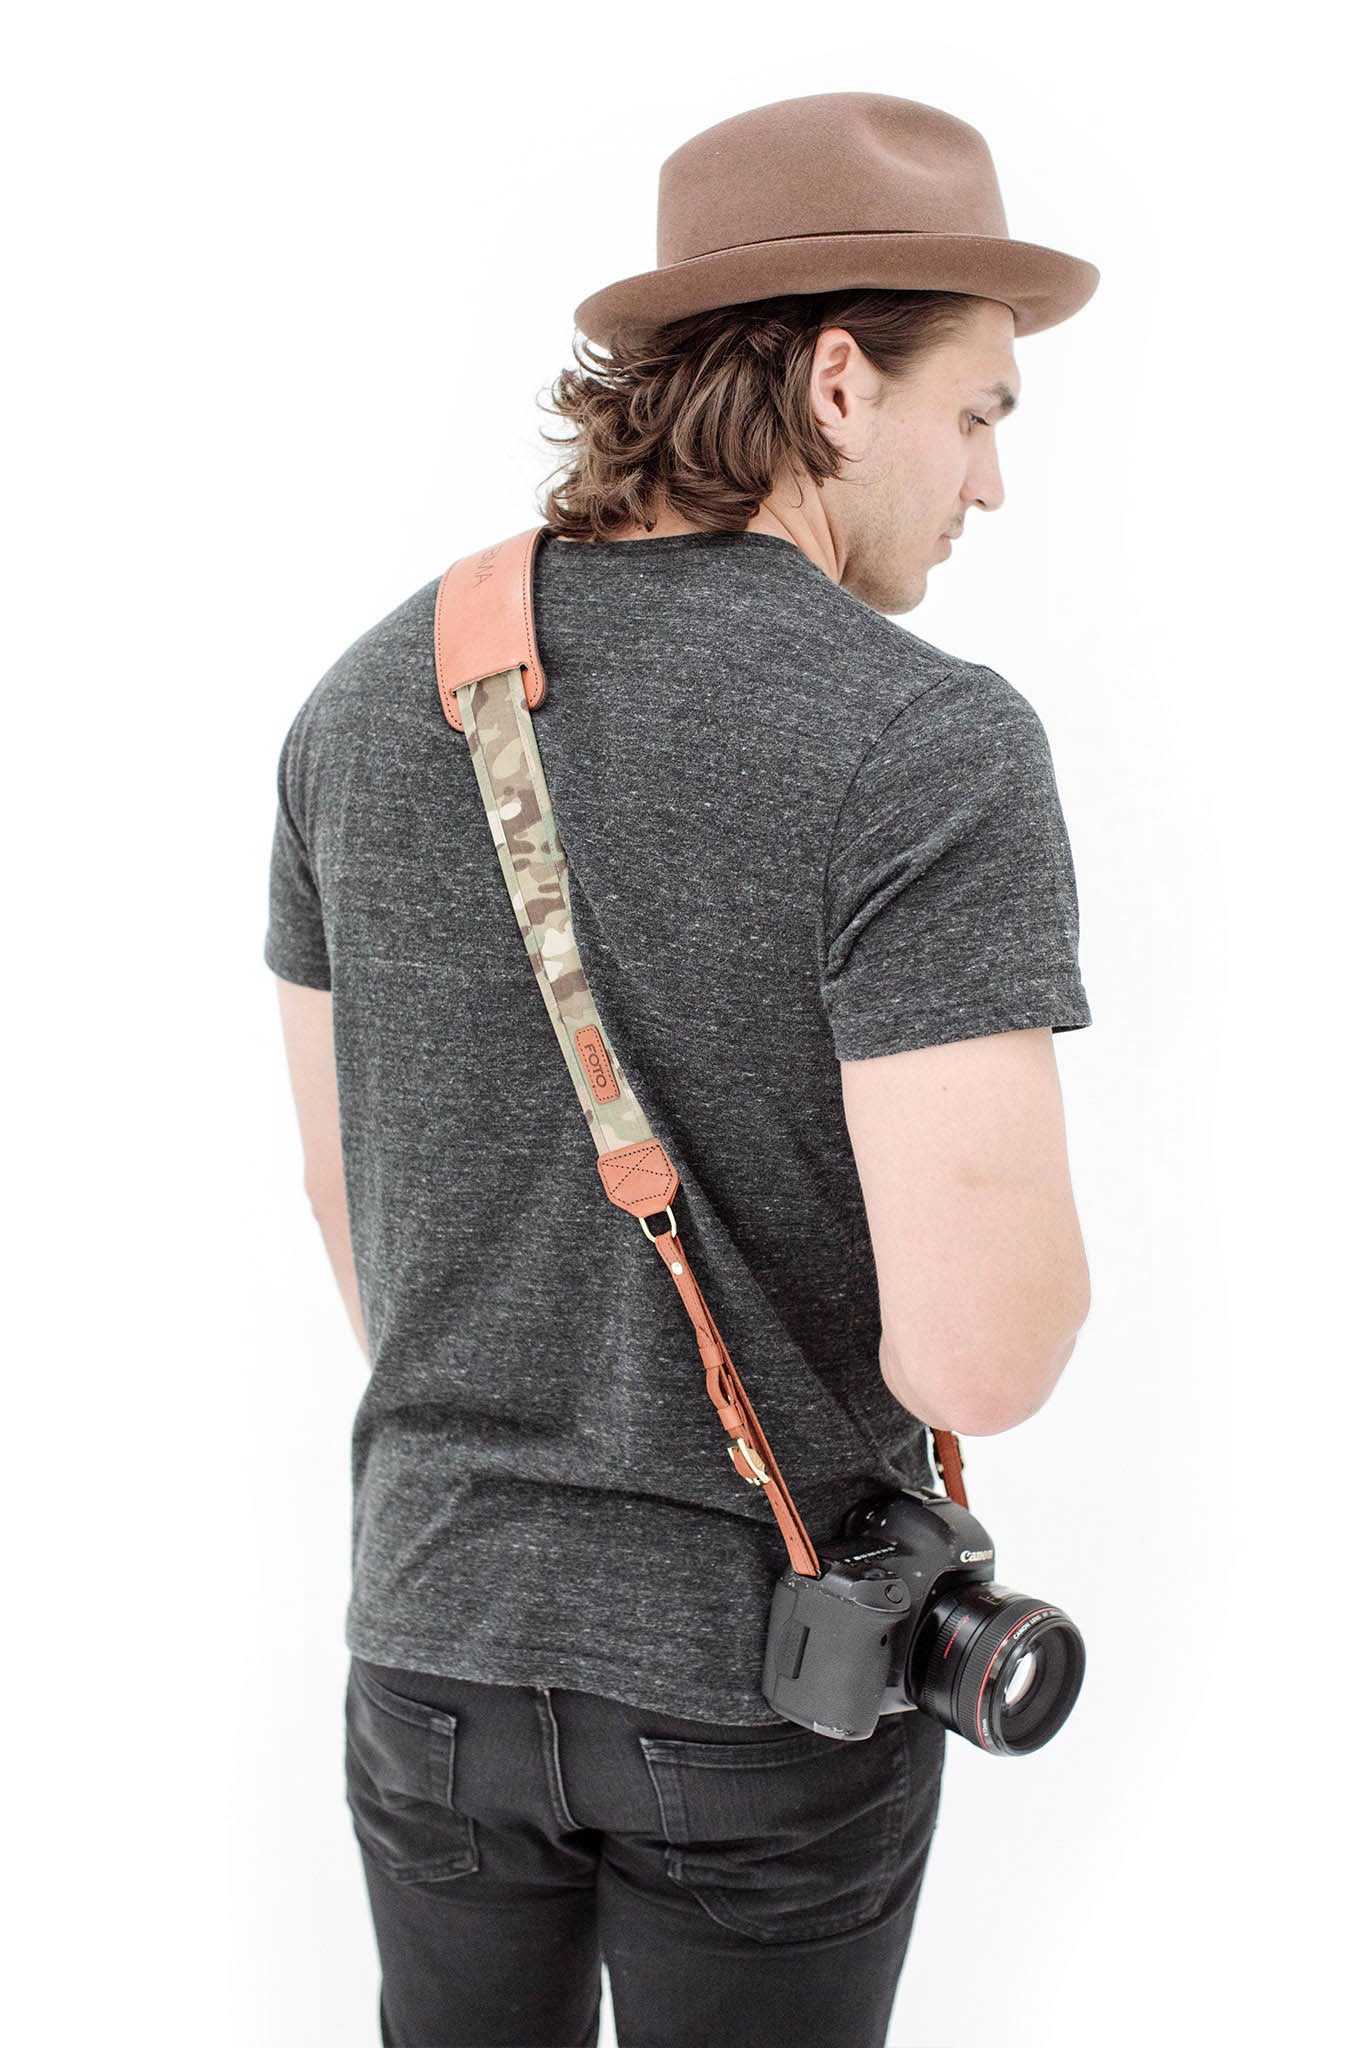 FOTO | Travis Fotostrap - a camo canvas and genuine leather camera strap that can be personalized with a monogram or business logo, making it the perfect personalized gift! 